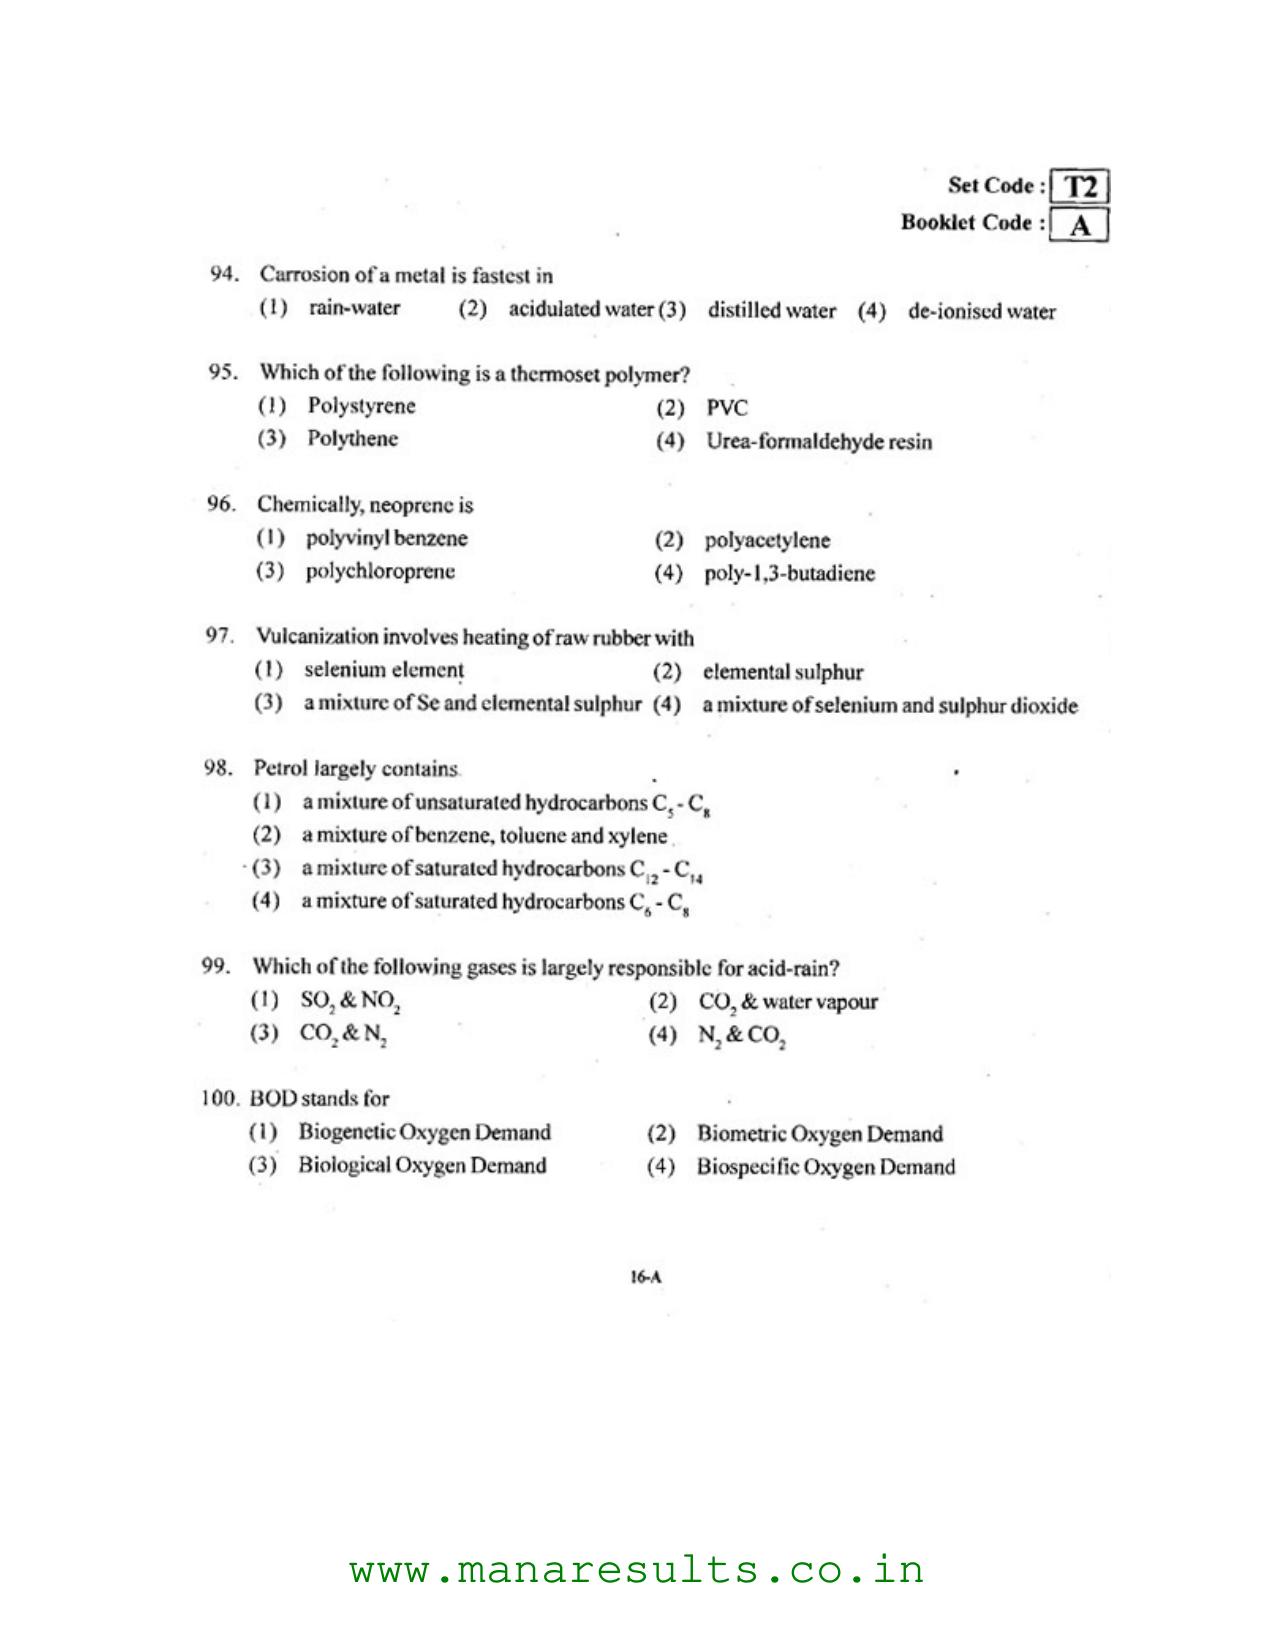 AP ECET 2016 Civil Engineering Old Previous Question Papers - Page 15